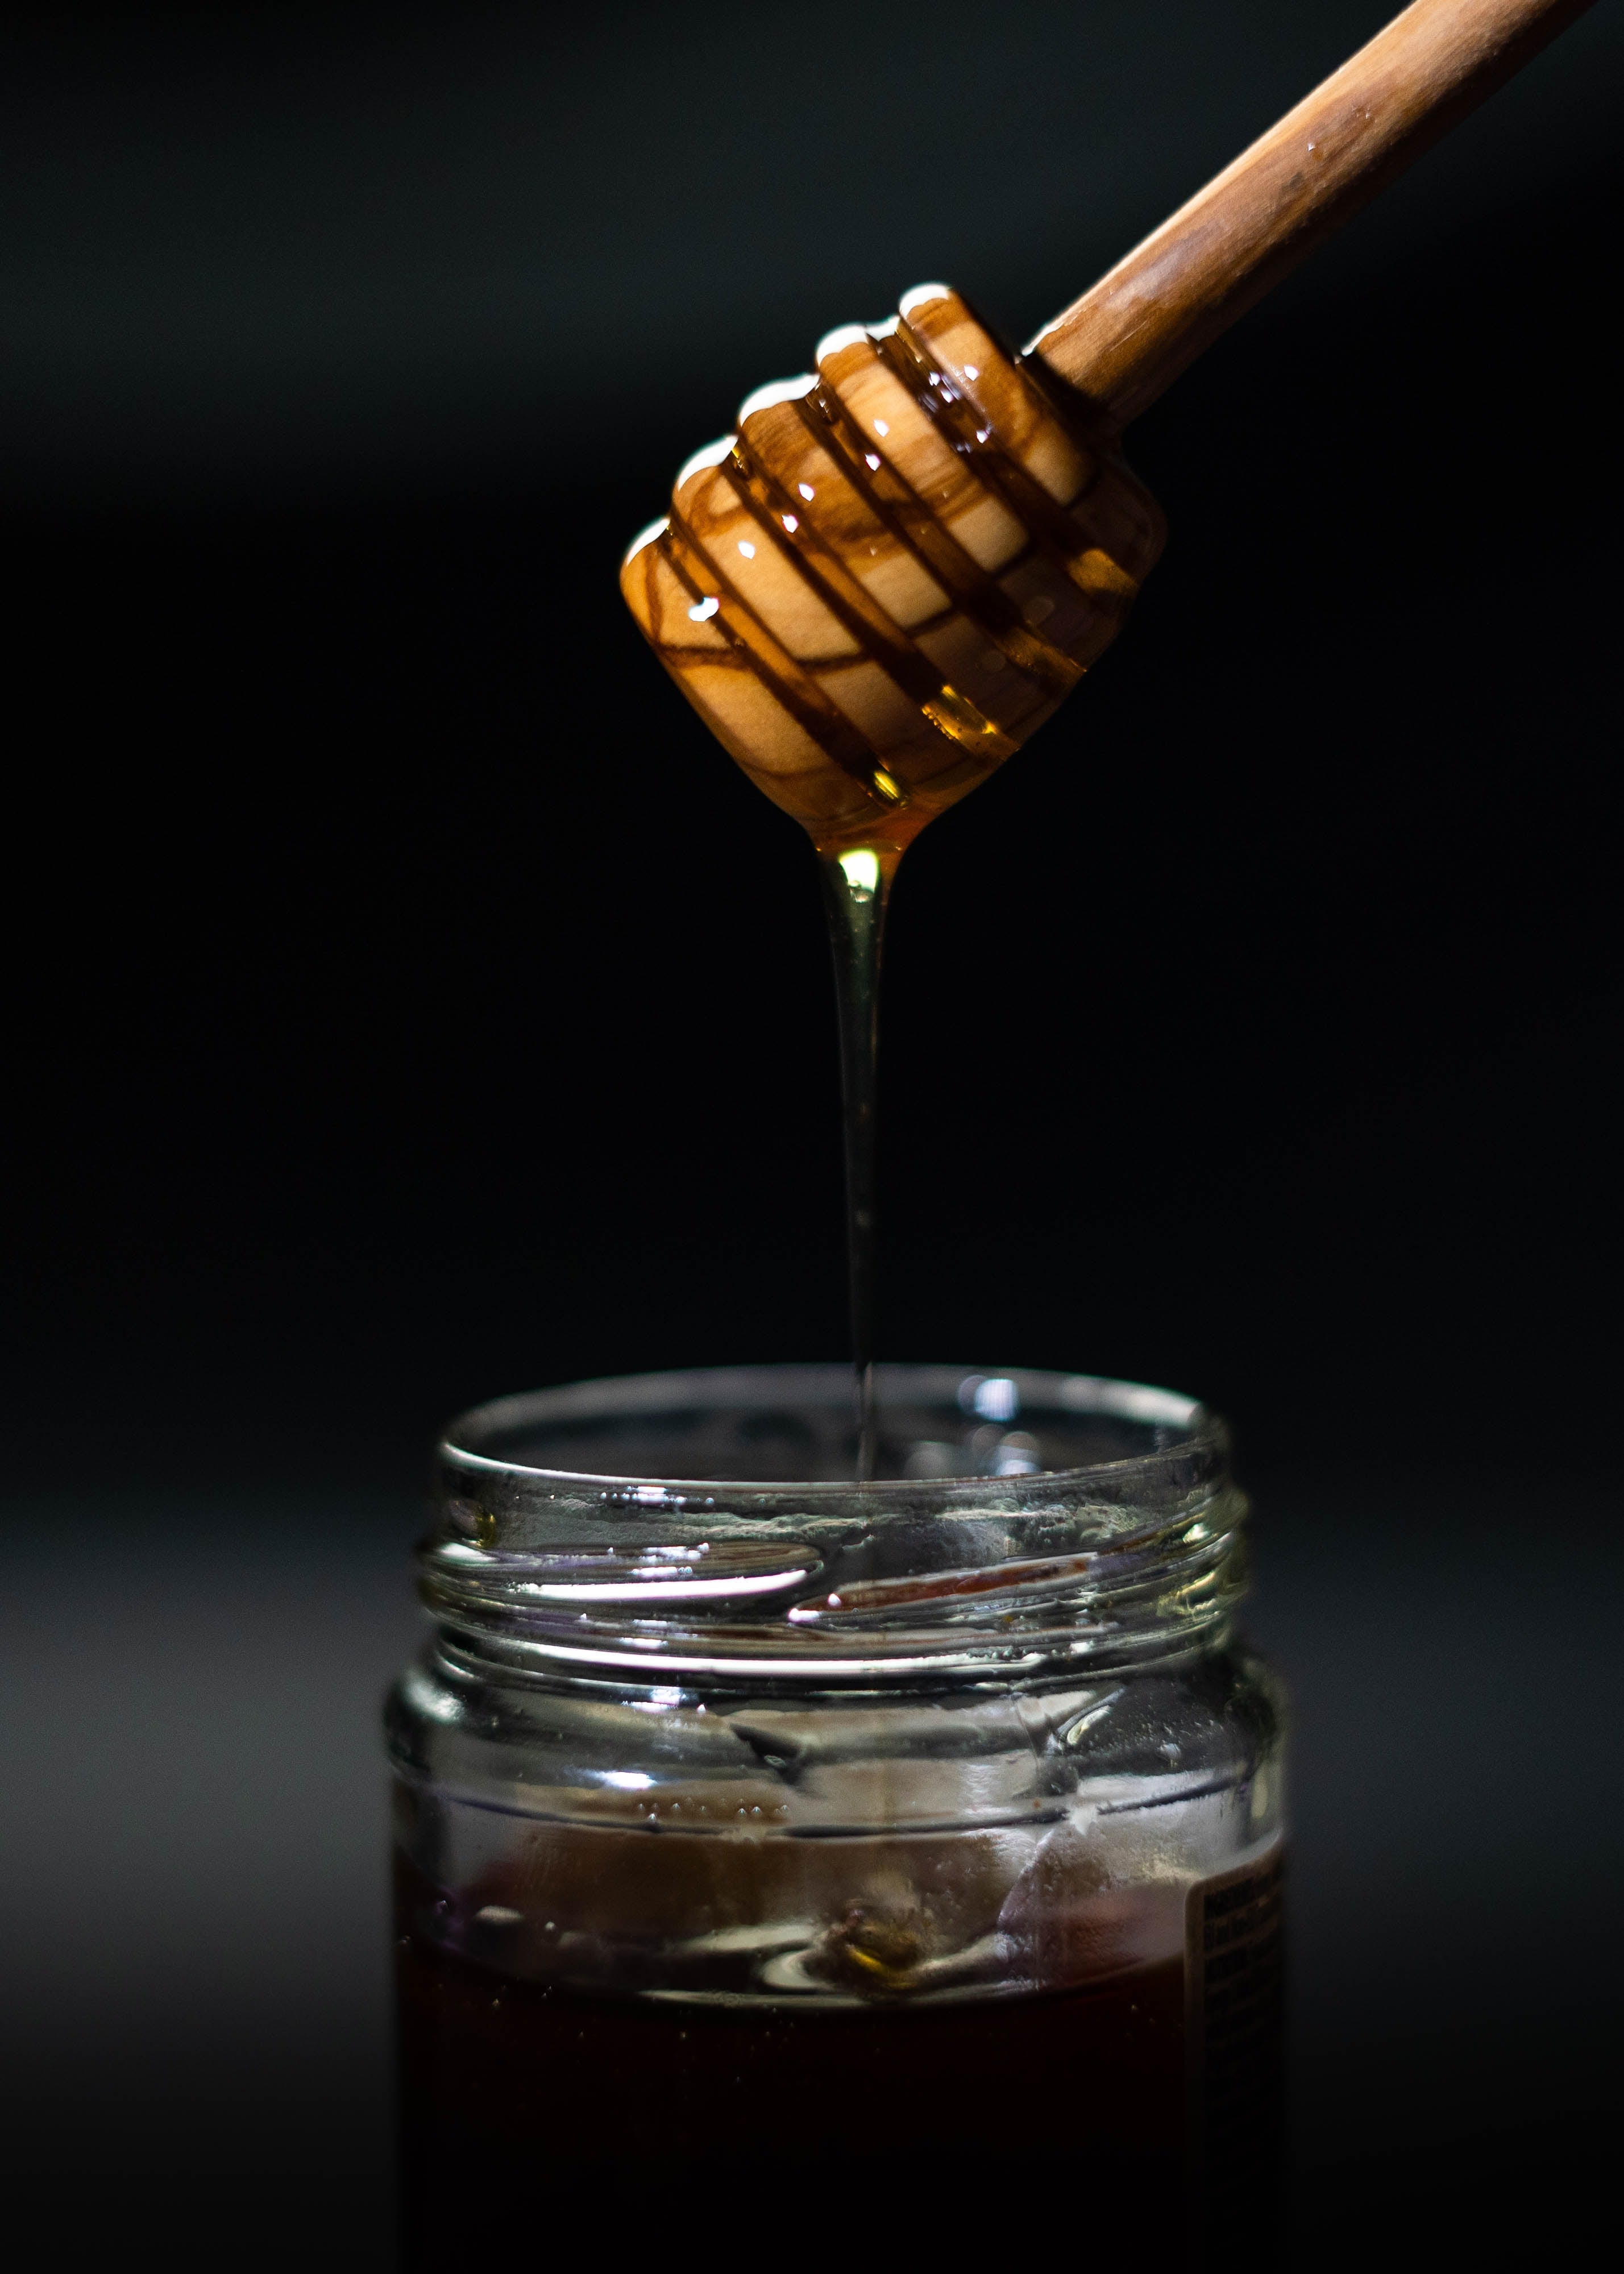 9 ways you can test whether your honey is real or adulterated